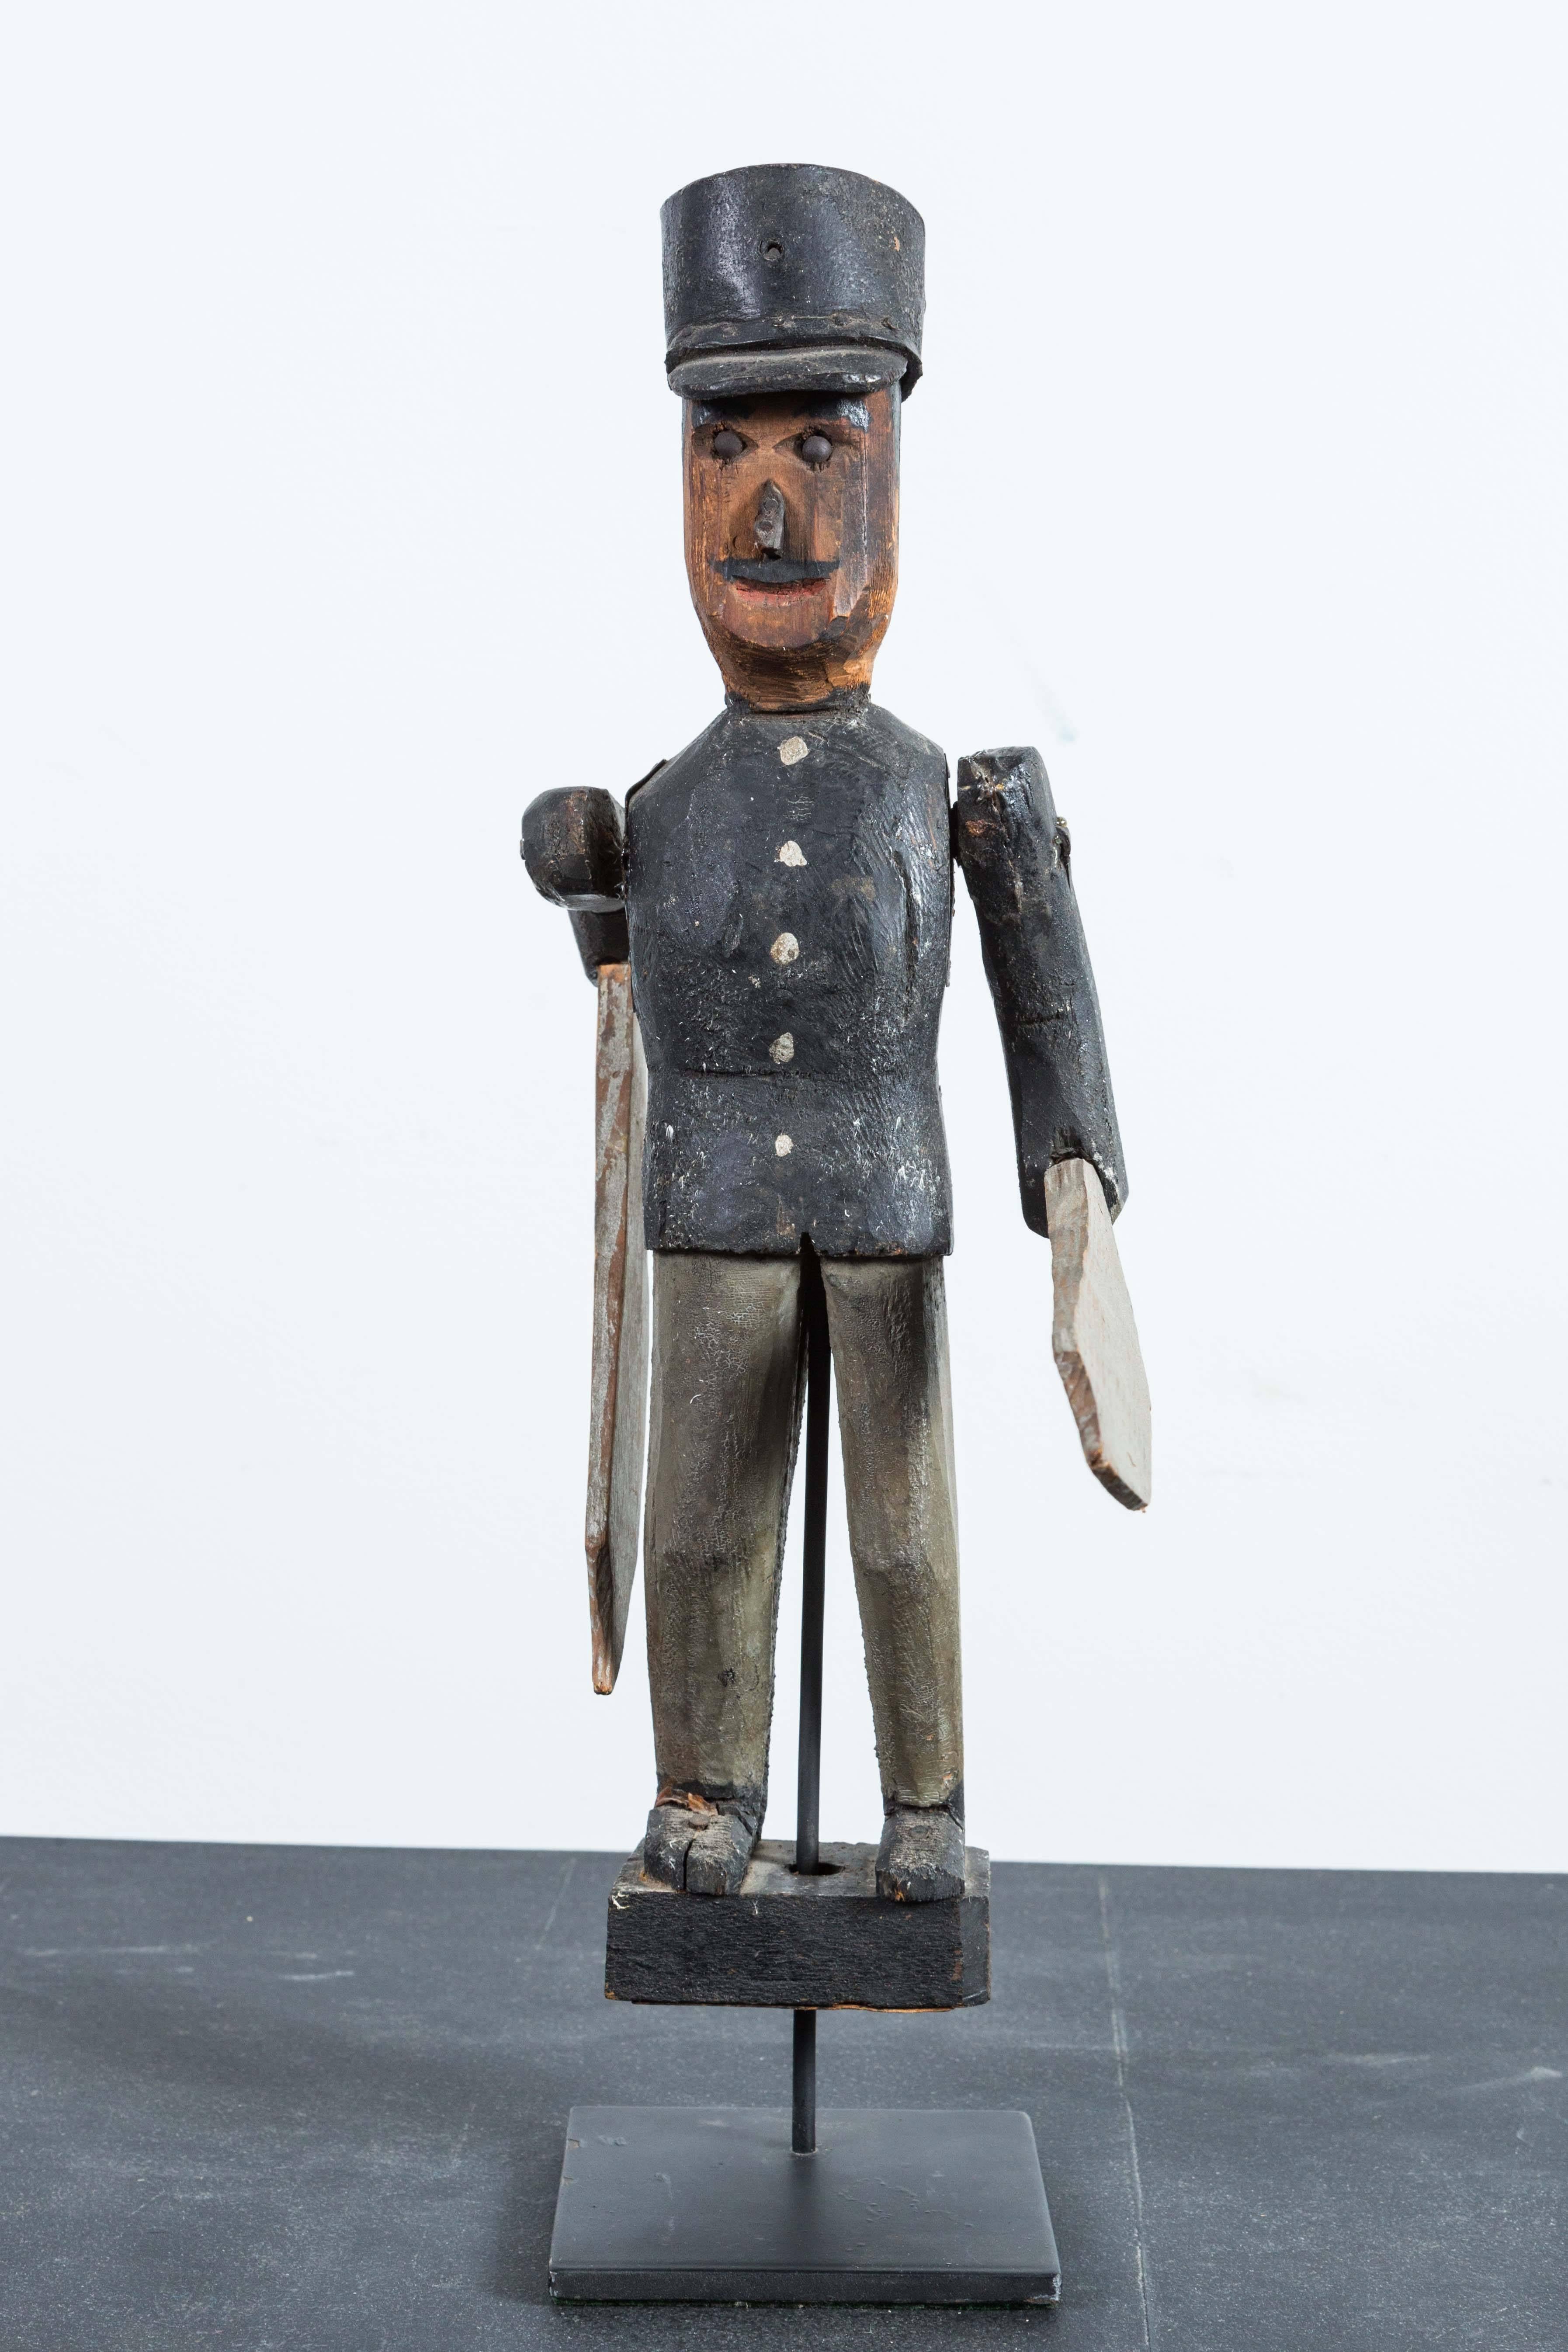 Carved and painted wooden soldier whirligig. Early 20th century American. Soldier has a leather hat with wooden brim. Presented on simple custom museum stand.